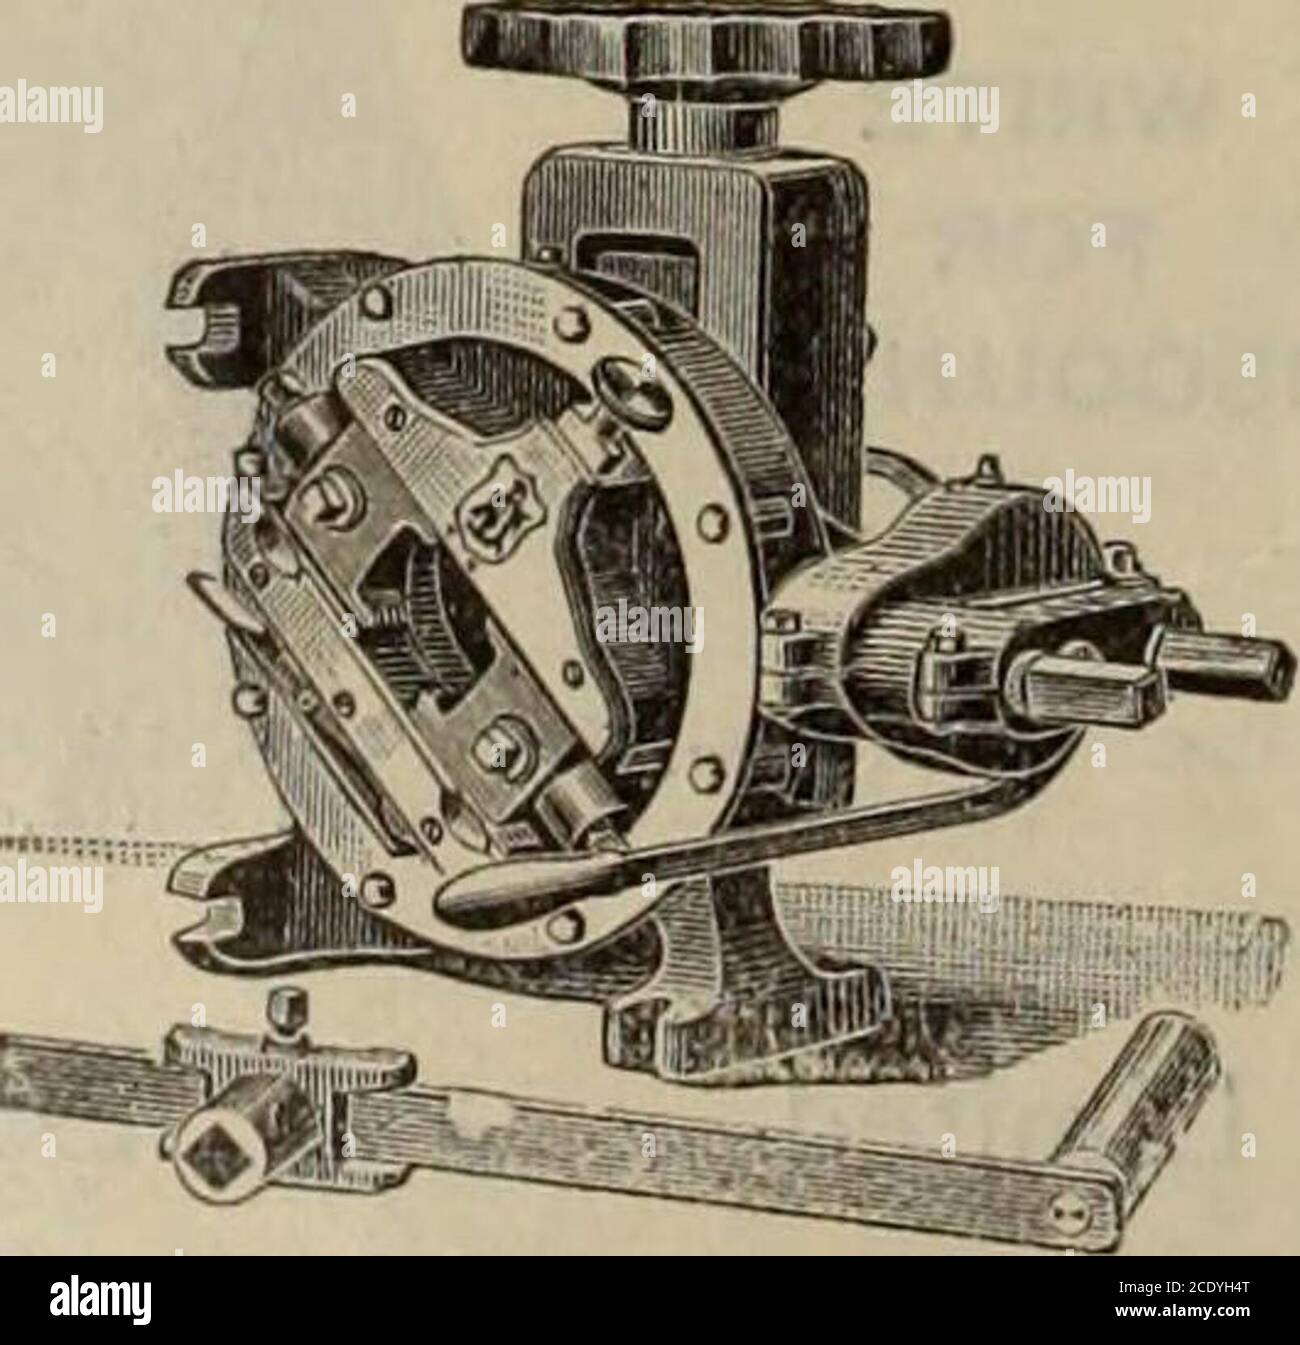 . Hardware merchandising January-June 1898 . Manufactured only by The Mica Boiler Covering Co., Ltd., also all kinds Mica Coverings for Boilers,Steam Pipes, Furnaces, etc. Office and Factory 9 Jordan St., TORONTO, CANADA. ARMSTRONG PIPE THREADING *ND CUTTINC-OFF MACHINES (Hand or Power) Armstrongs Adjustable Stocks and Dies,Vises (hinged), Wrenches, Pipe Cut-ters, Clamp Dogs, etc. 4 Our goods are of the highest grade, and are celebrated for theirtime and labor saving qualities, Send for catalogue.. New No. 0 Threading Machine. THE ARMSTRONG MFG. CO. New York Office . 139 Centre Street Bridgepo Stock Photo